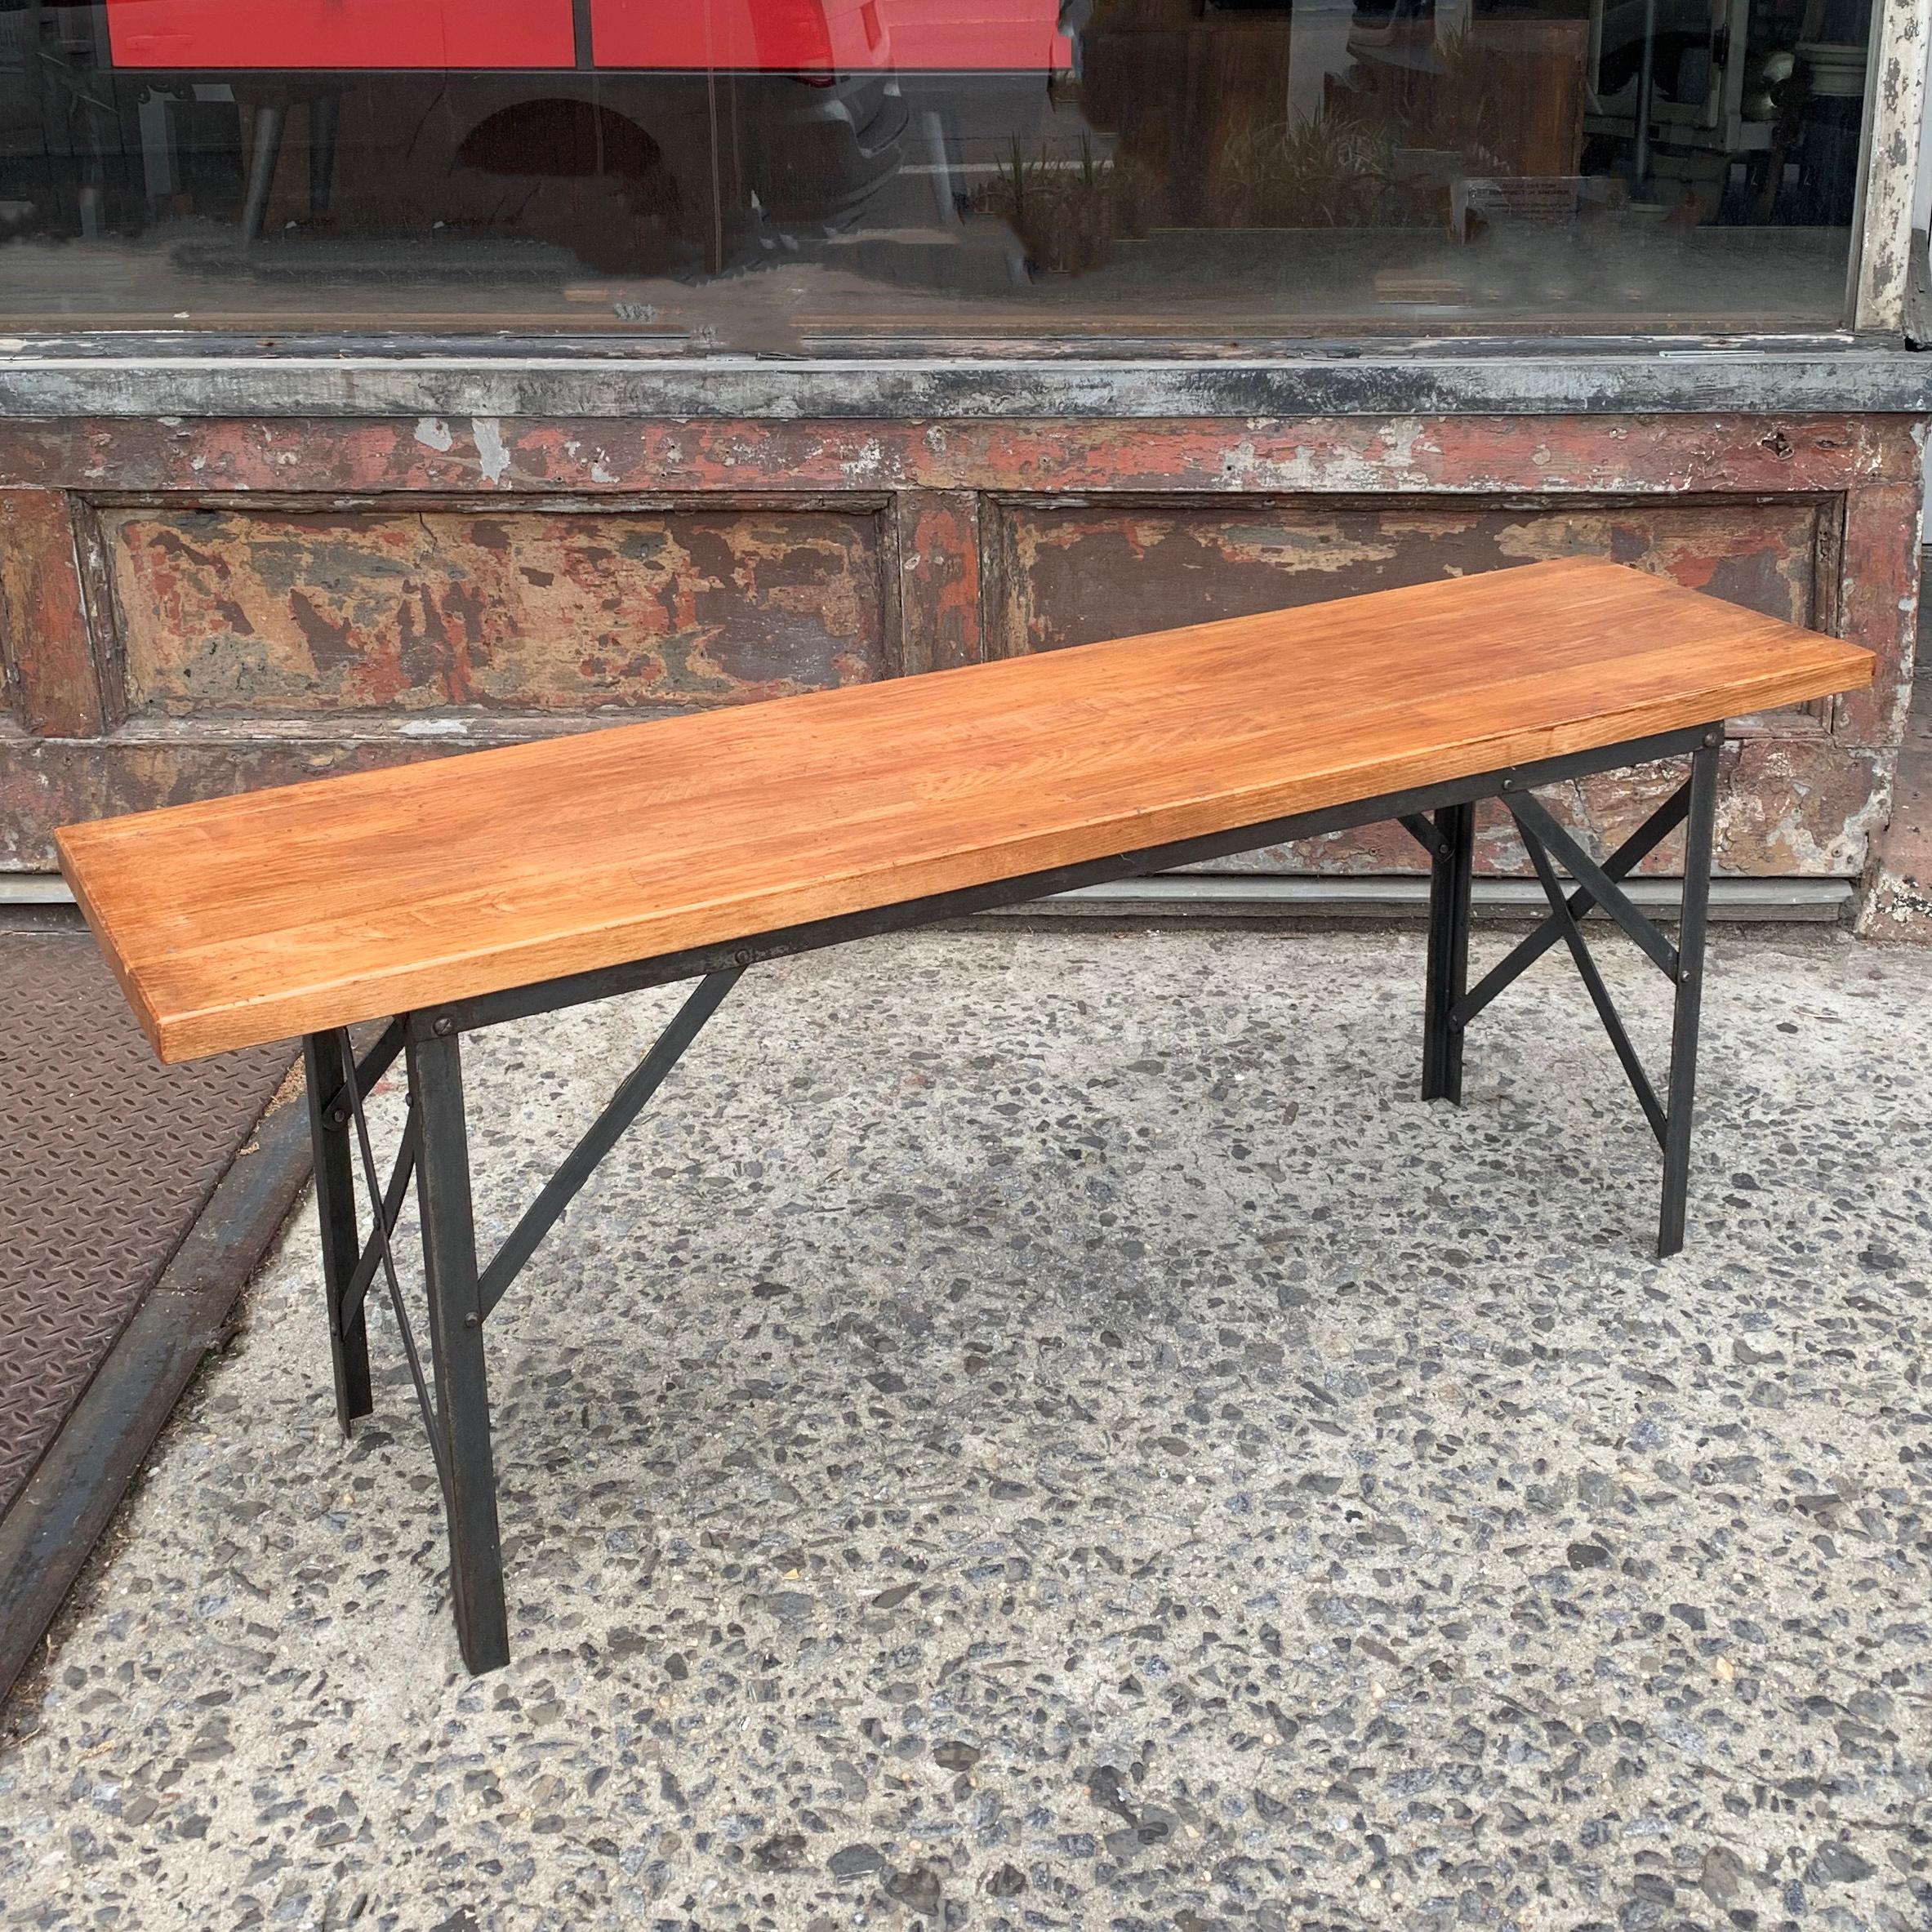 20th Century Industrial Maple Angle Iron Bench